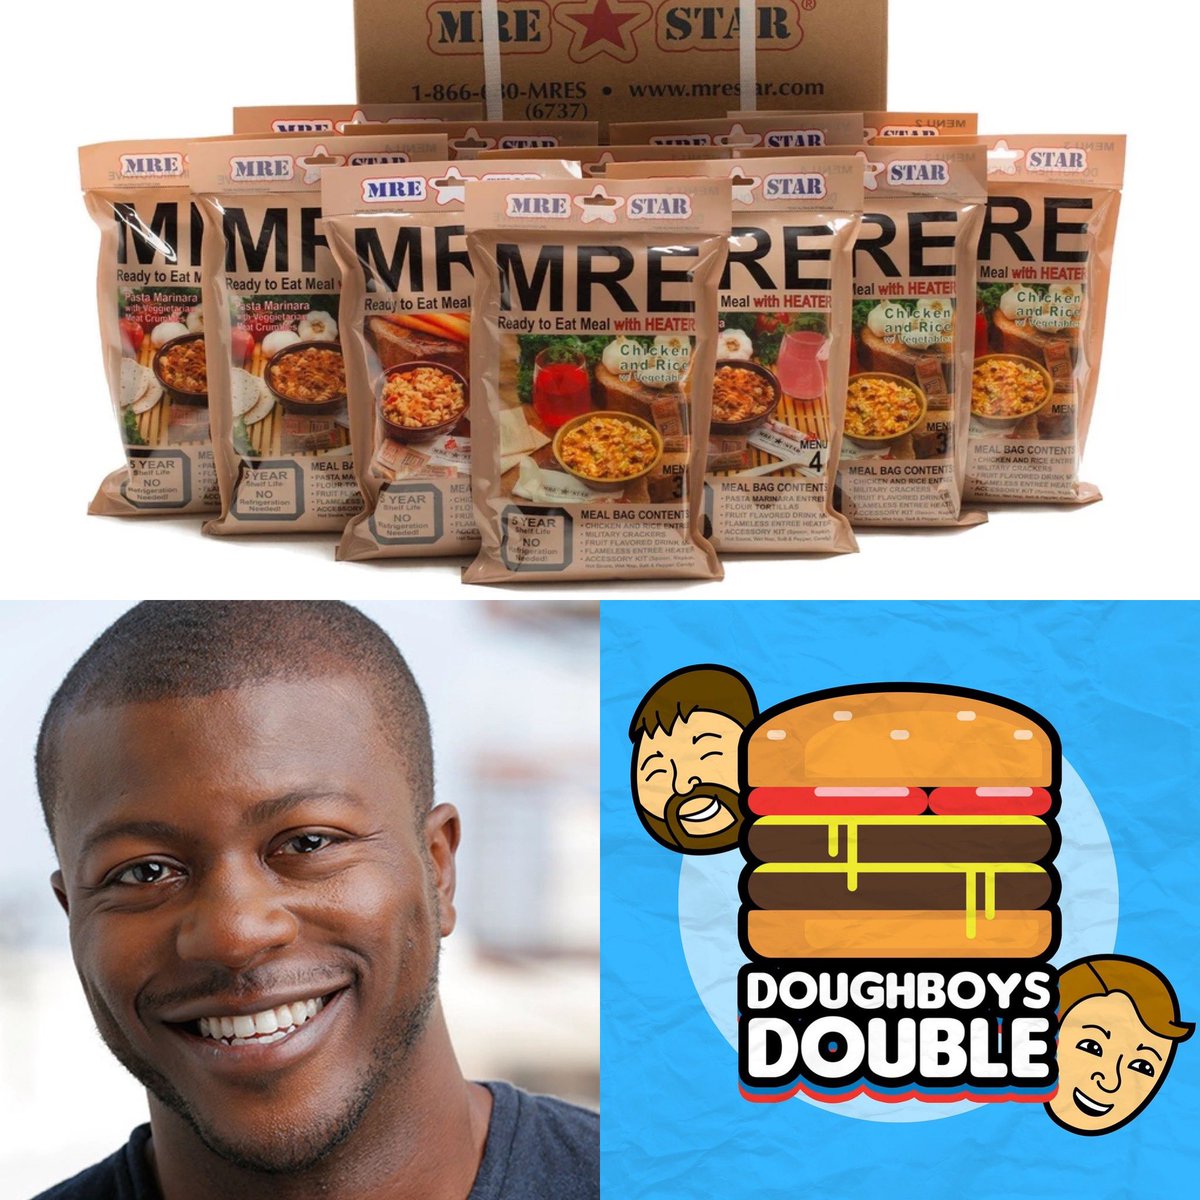 Doughboys Double Tuesday! Edwin Hodge (The Purge, Six, The Tomorrow War) joins the 'boys to talk basketball and snacking on set before a taste test of rations and MREs. patreon.com/doughboys